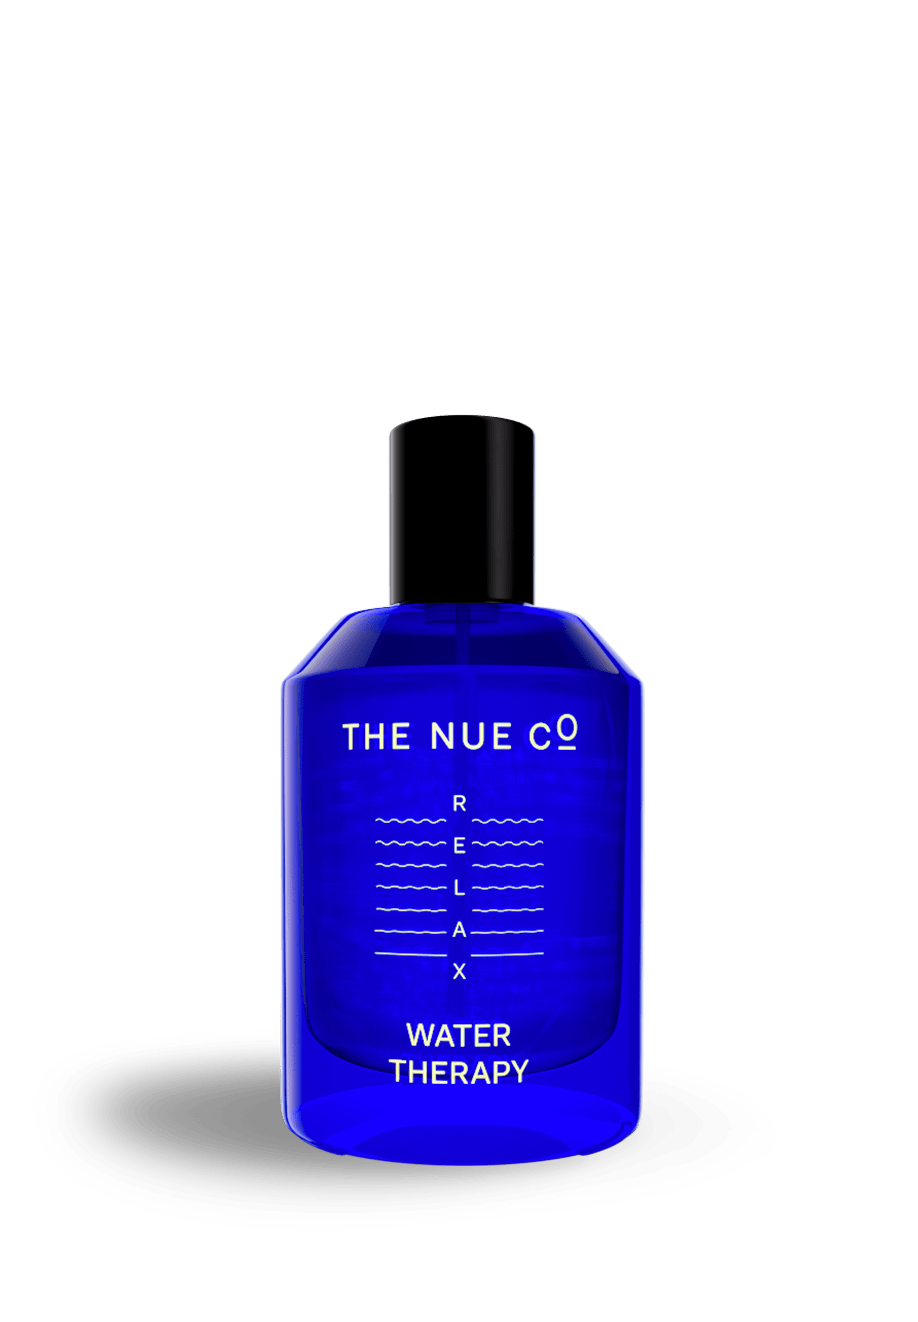 WATER THERAPY single The Nue Co. 